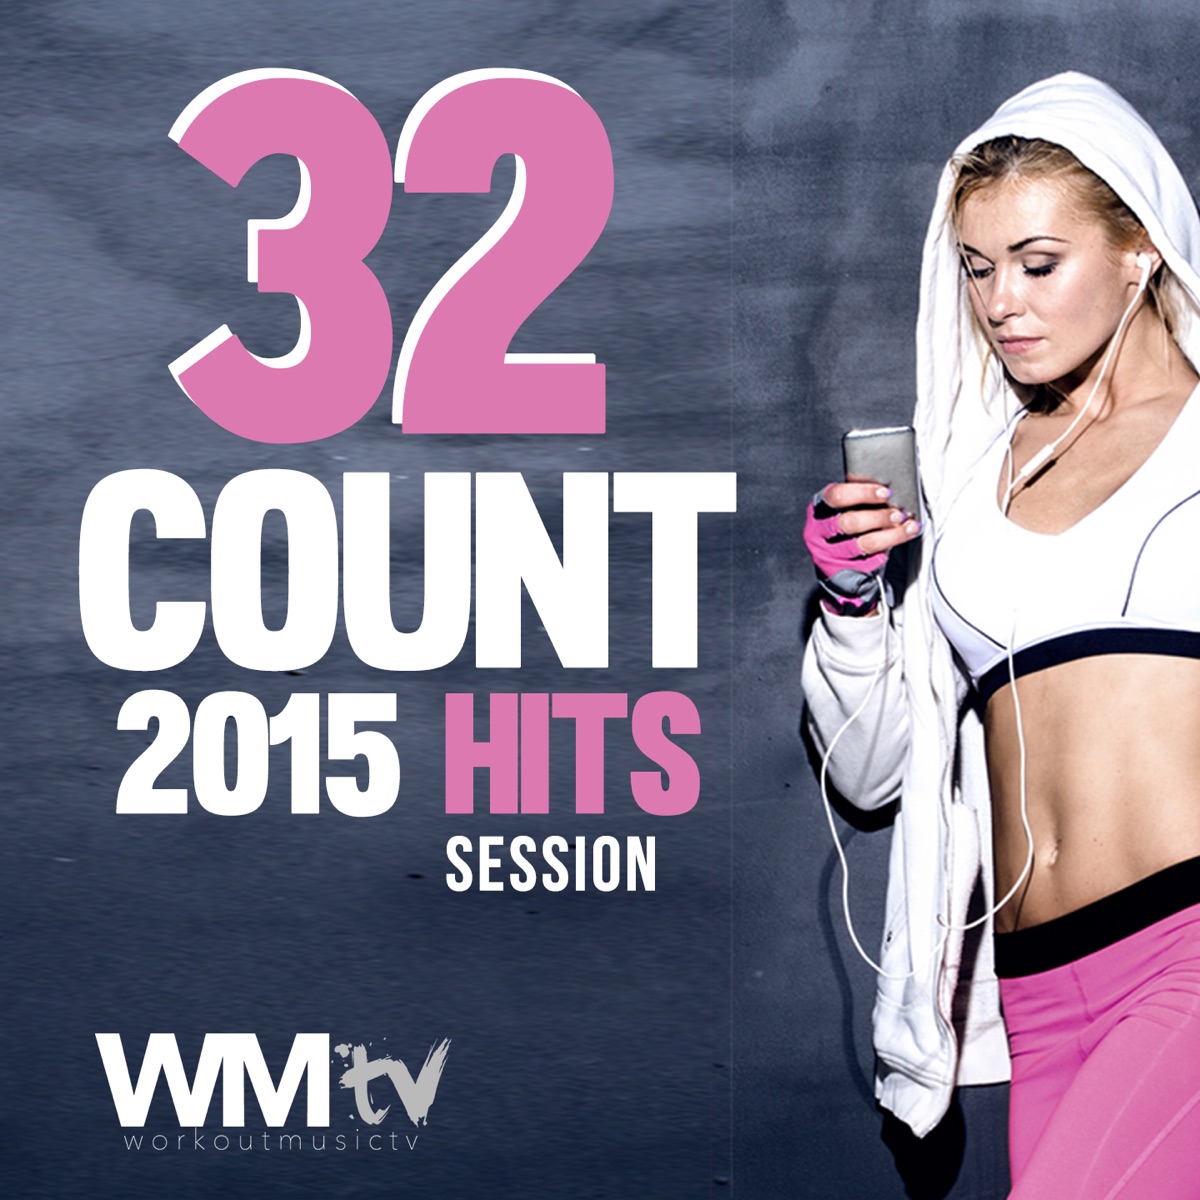 Various Artists - 32 Count 2015 Hits Session (60 Minutes Mixed Compilation for Fitness & Workout 135 BPM / 32 Count)